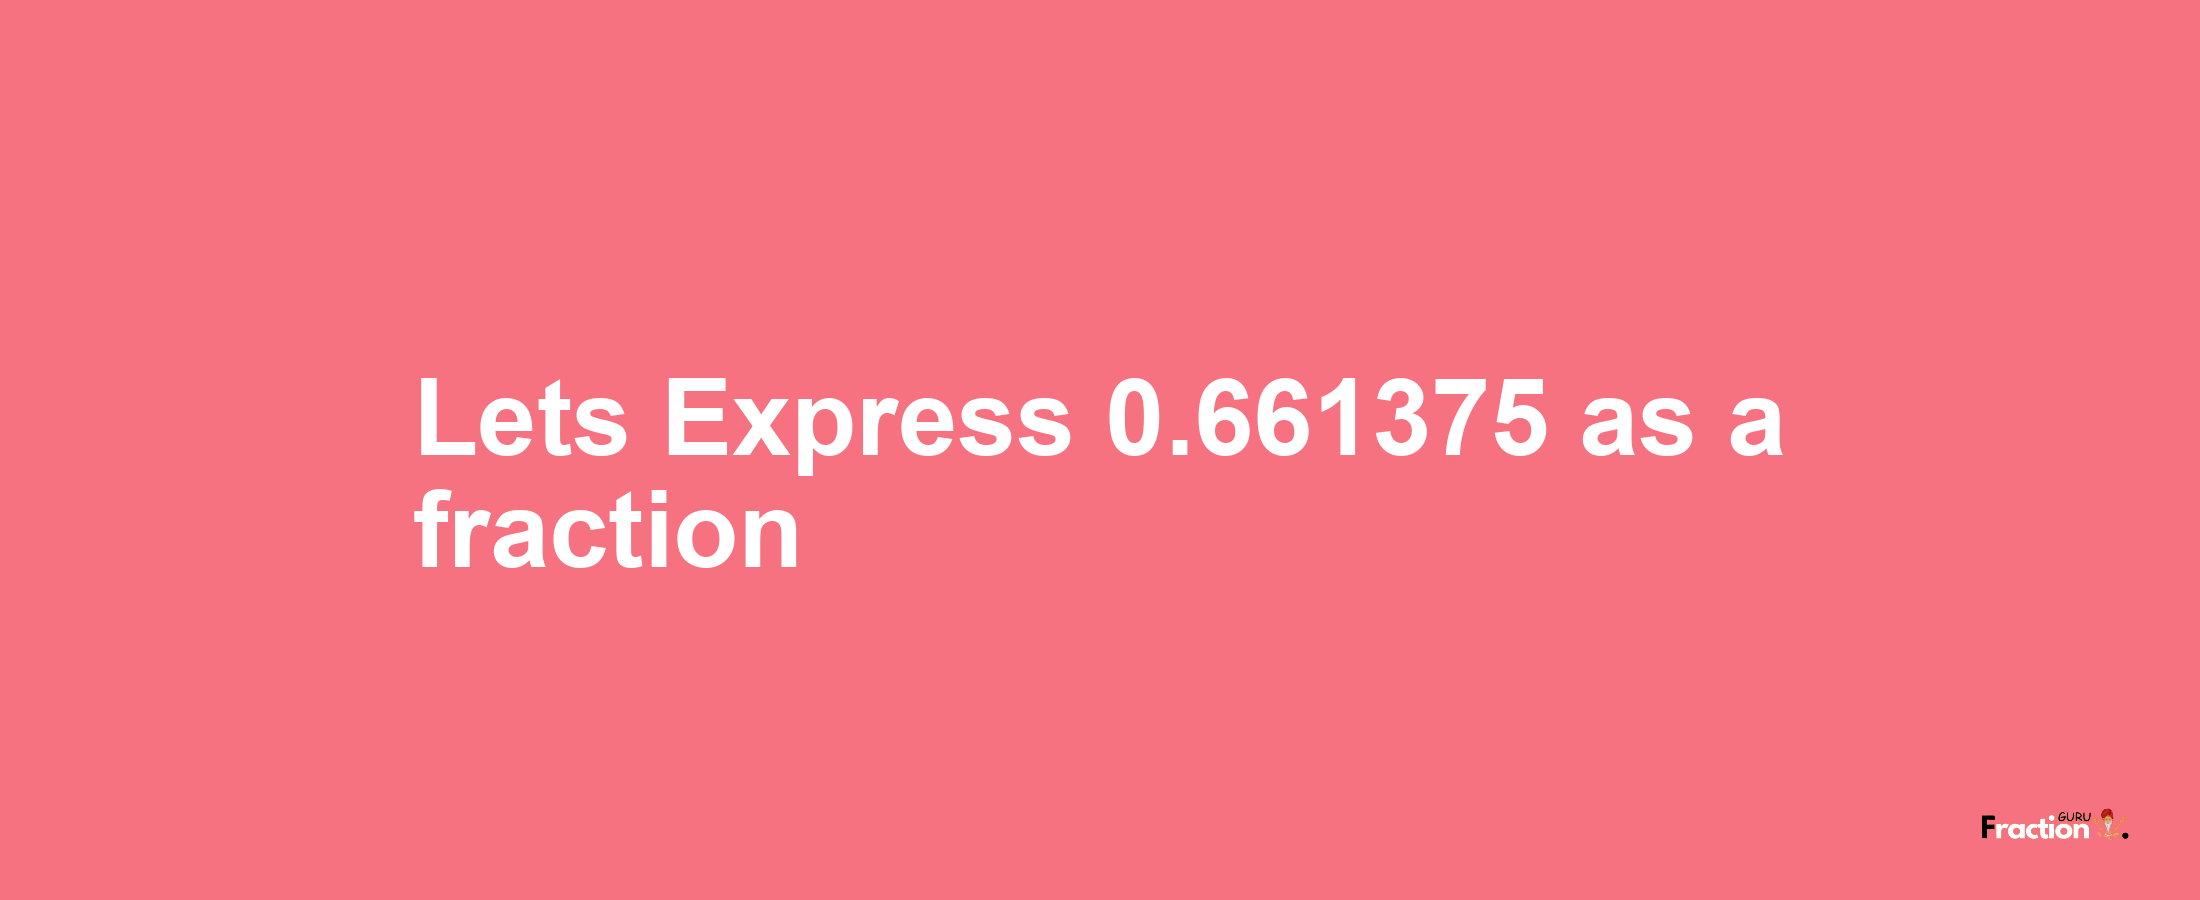 Lets Express 0.661375 as afraction